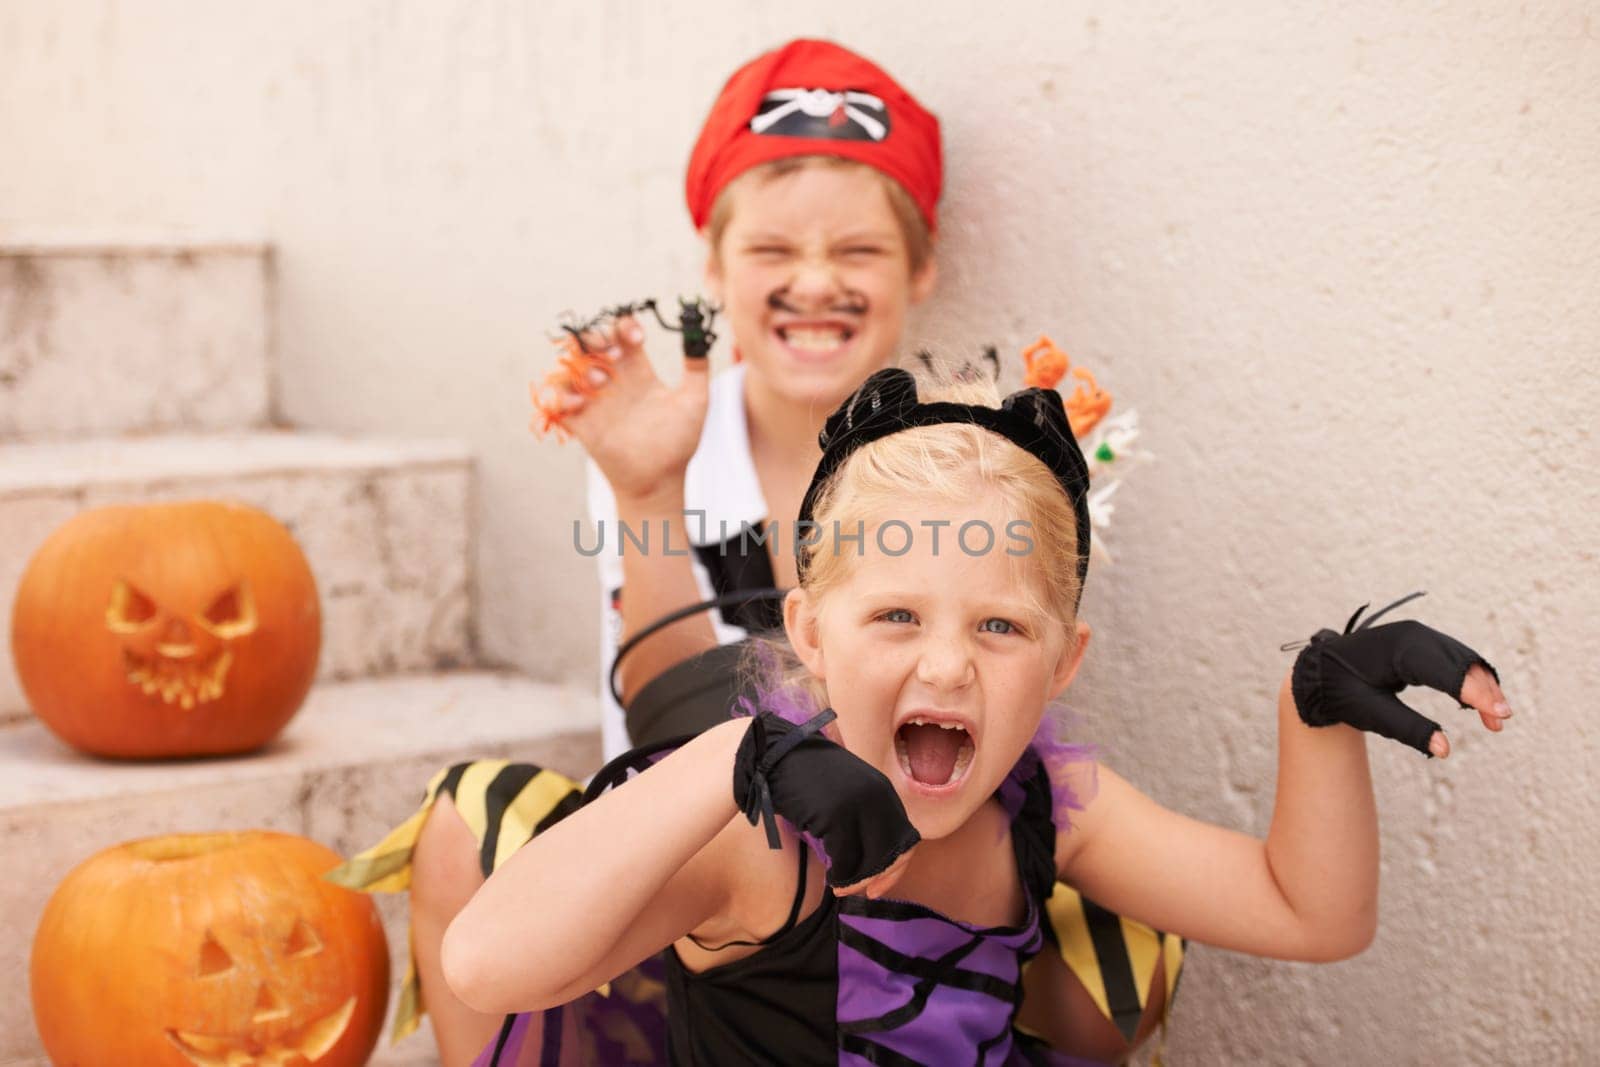 Siblings, portrait and halloween costume by outdoor, theme paint and happiness in childhood. Boy, girl or scary face for holiday party event with pumpkin, excited fairy or pirate by backyard stairs.